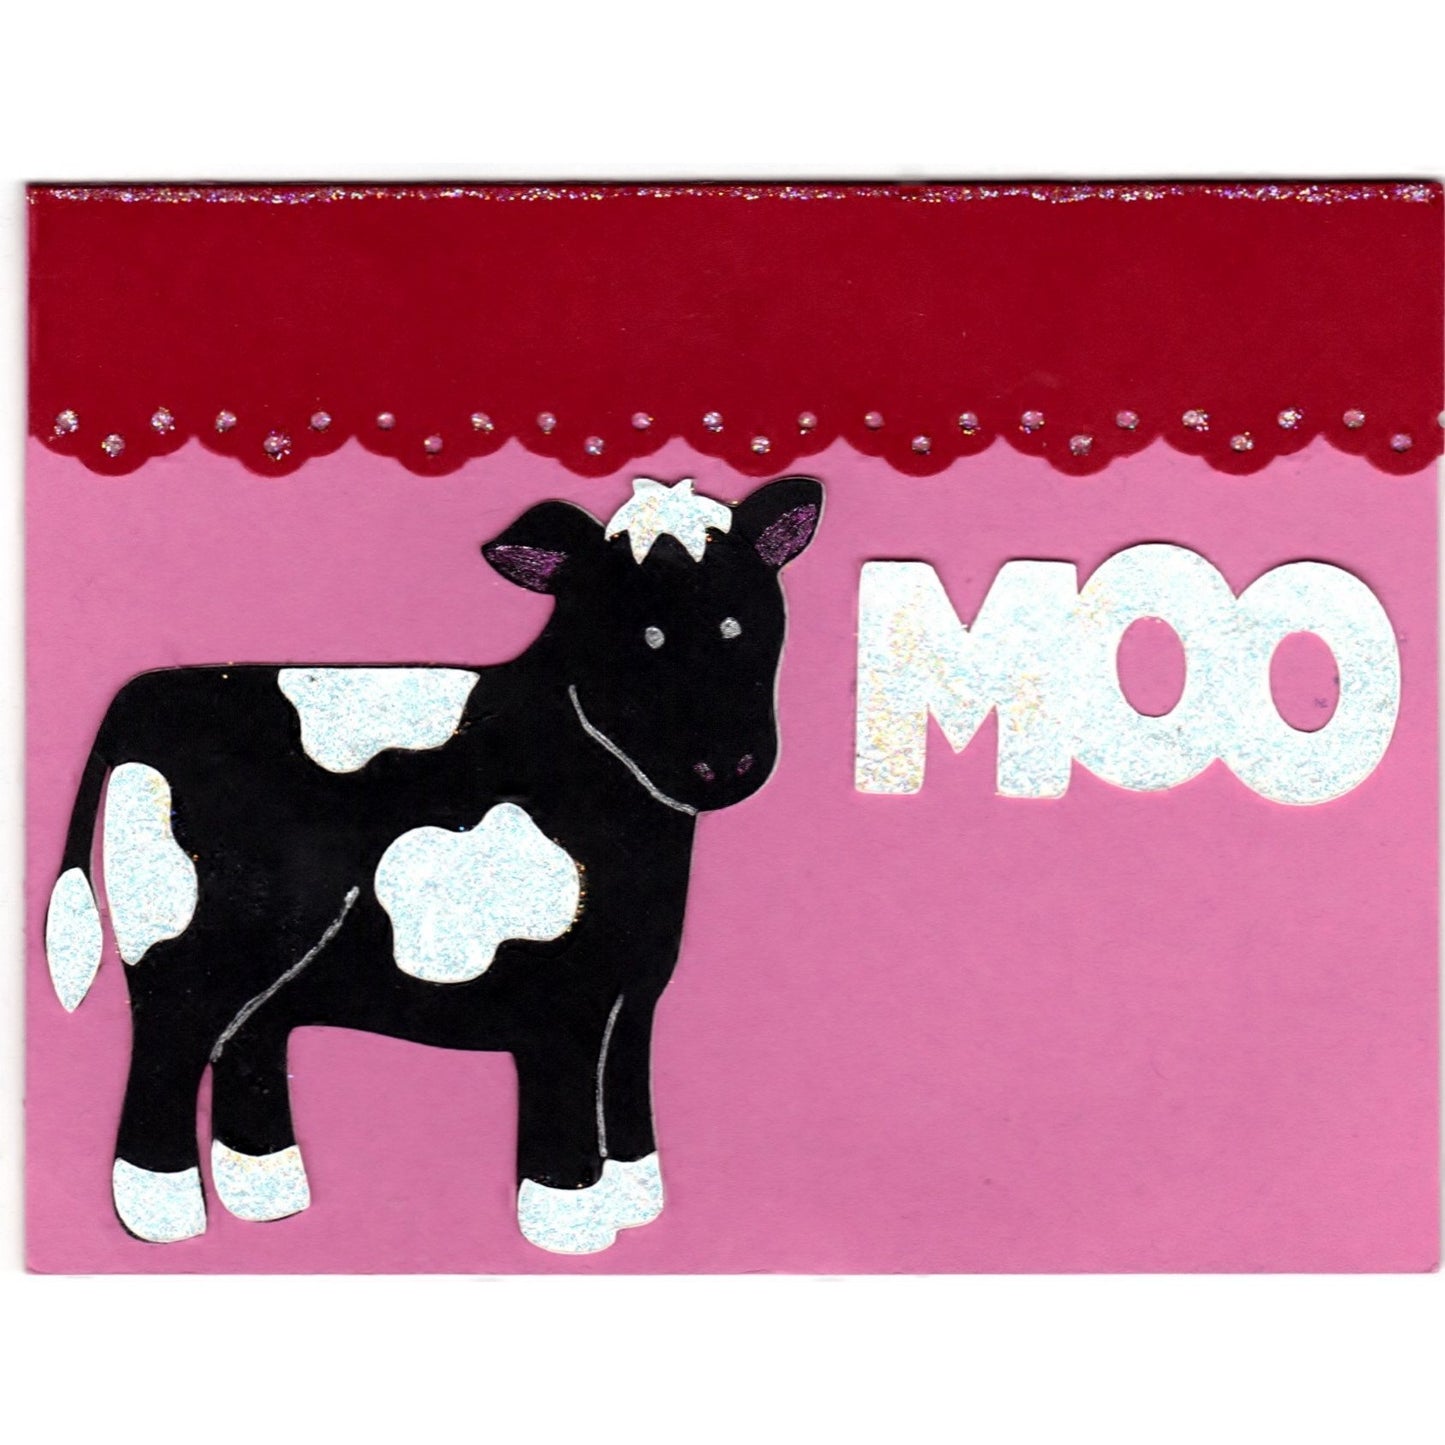 Moo Sparkle Cow Handmade Good Greeting Supply Card - Cards And Other Paper Products - Made In U.S.A. - SharPharMade - 1